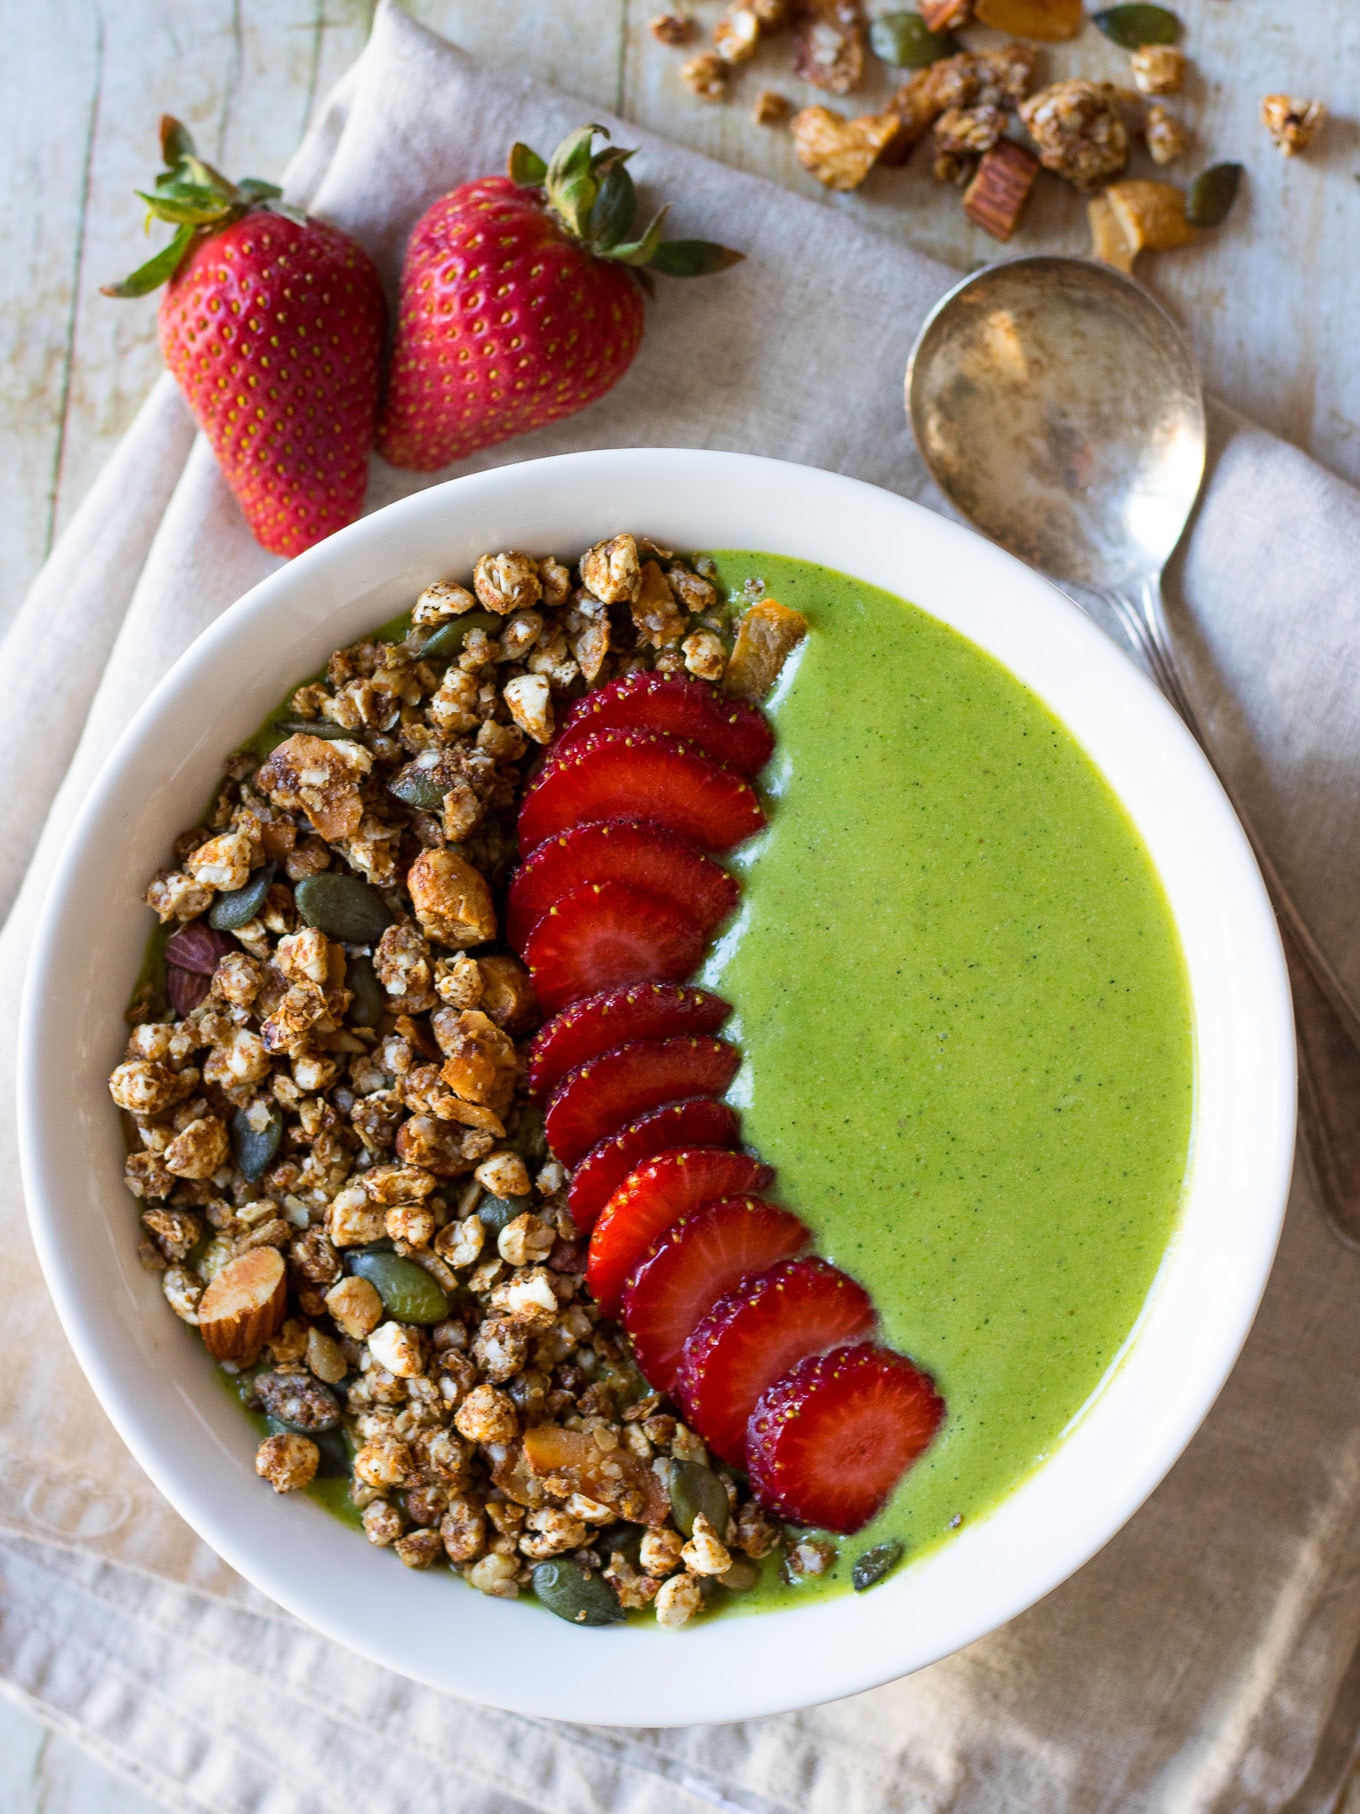 A thick green protein #smoothiebowl is a quick, satisfying healthy breakfast ready in no time. #paleo and #glutenfree, with an easy vegan #dairyfree option too. #greensmoothie